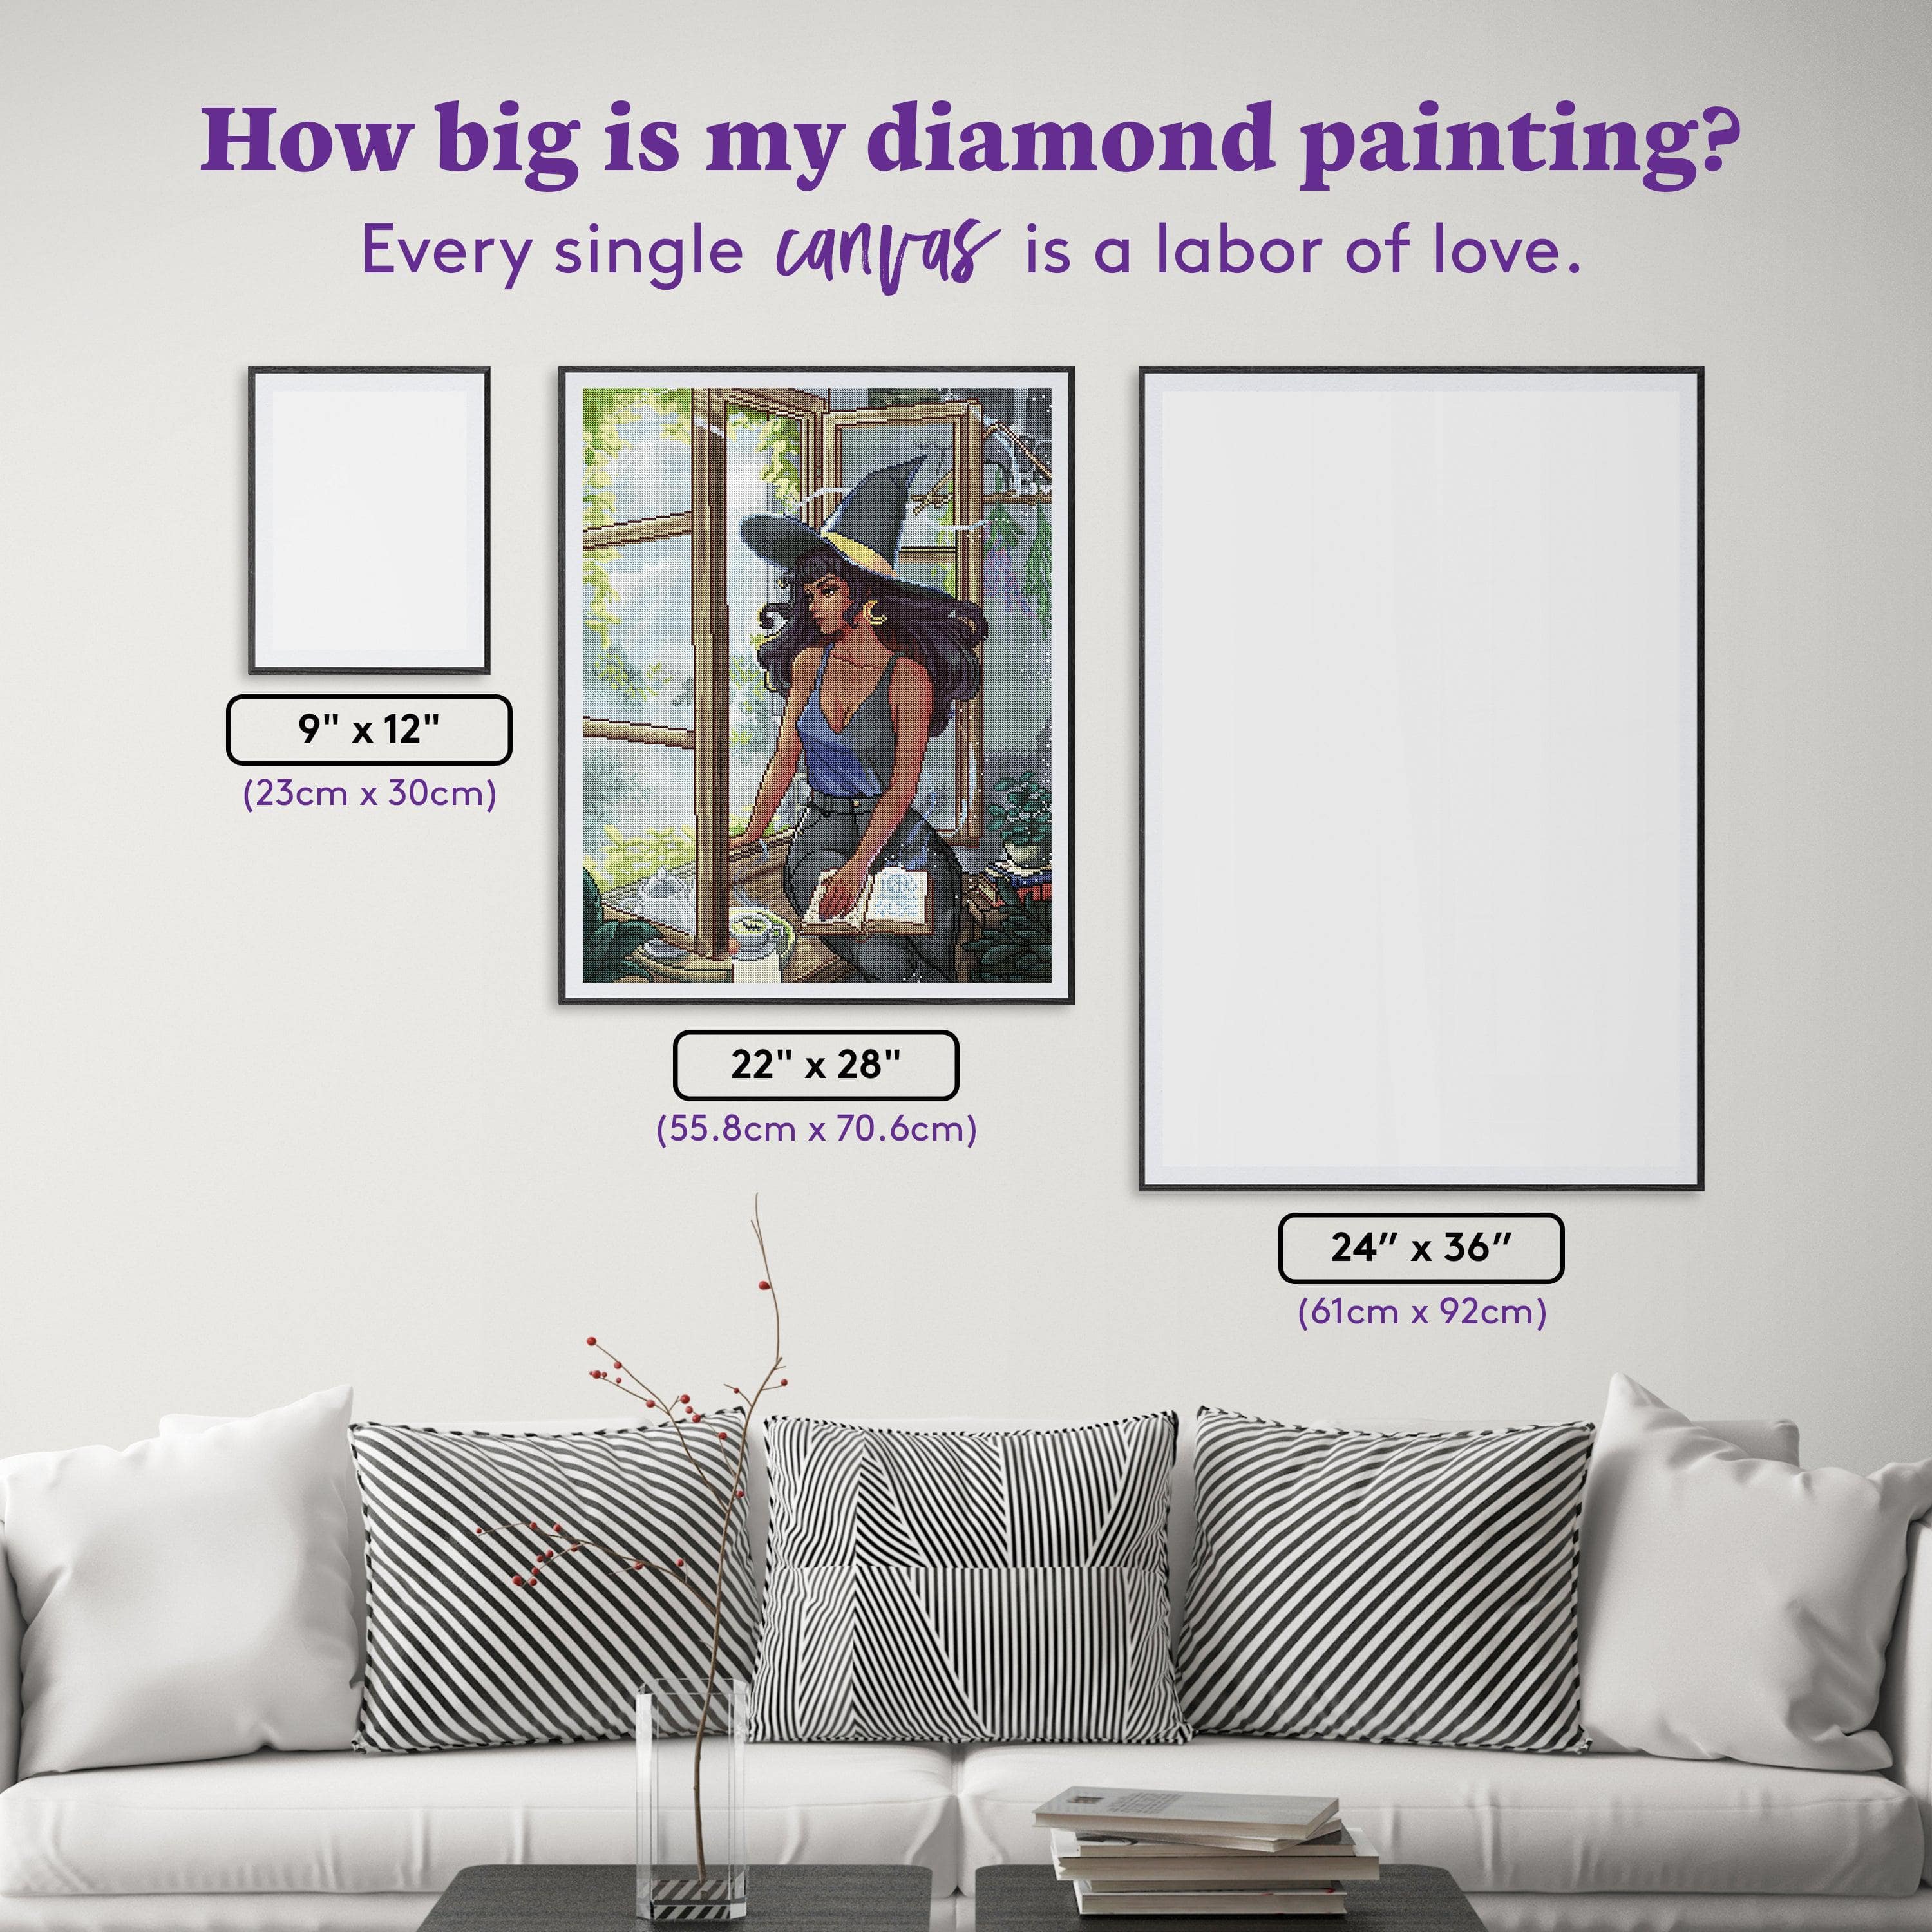 40 Diamond Art Kits for Adults: The Best Diamond Painting Kits for Fun,  Stress Reduction & Home Decor, Shopping Guides